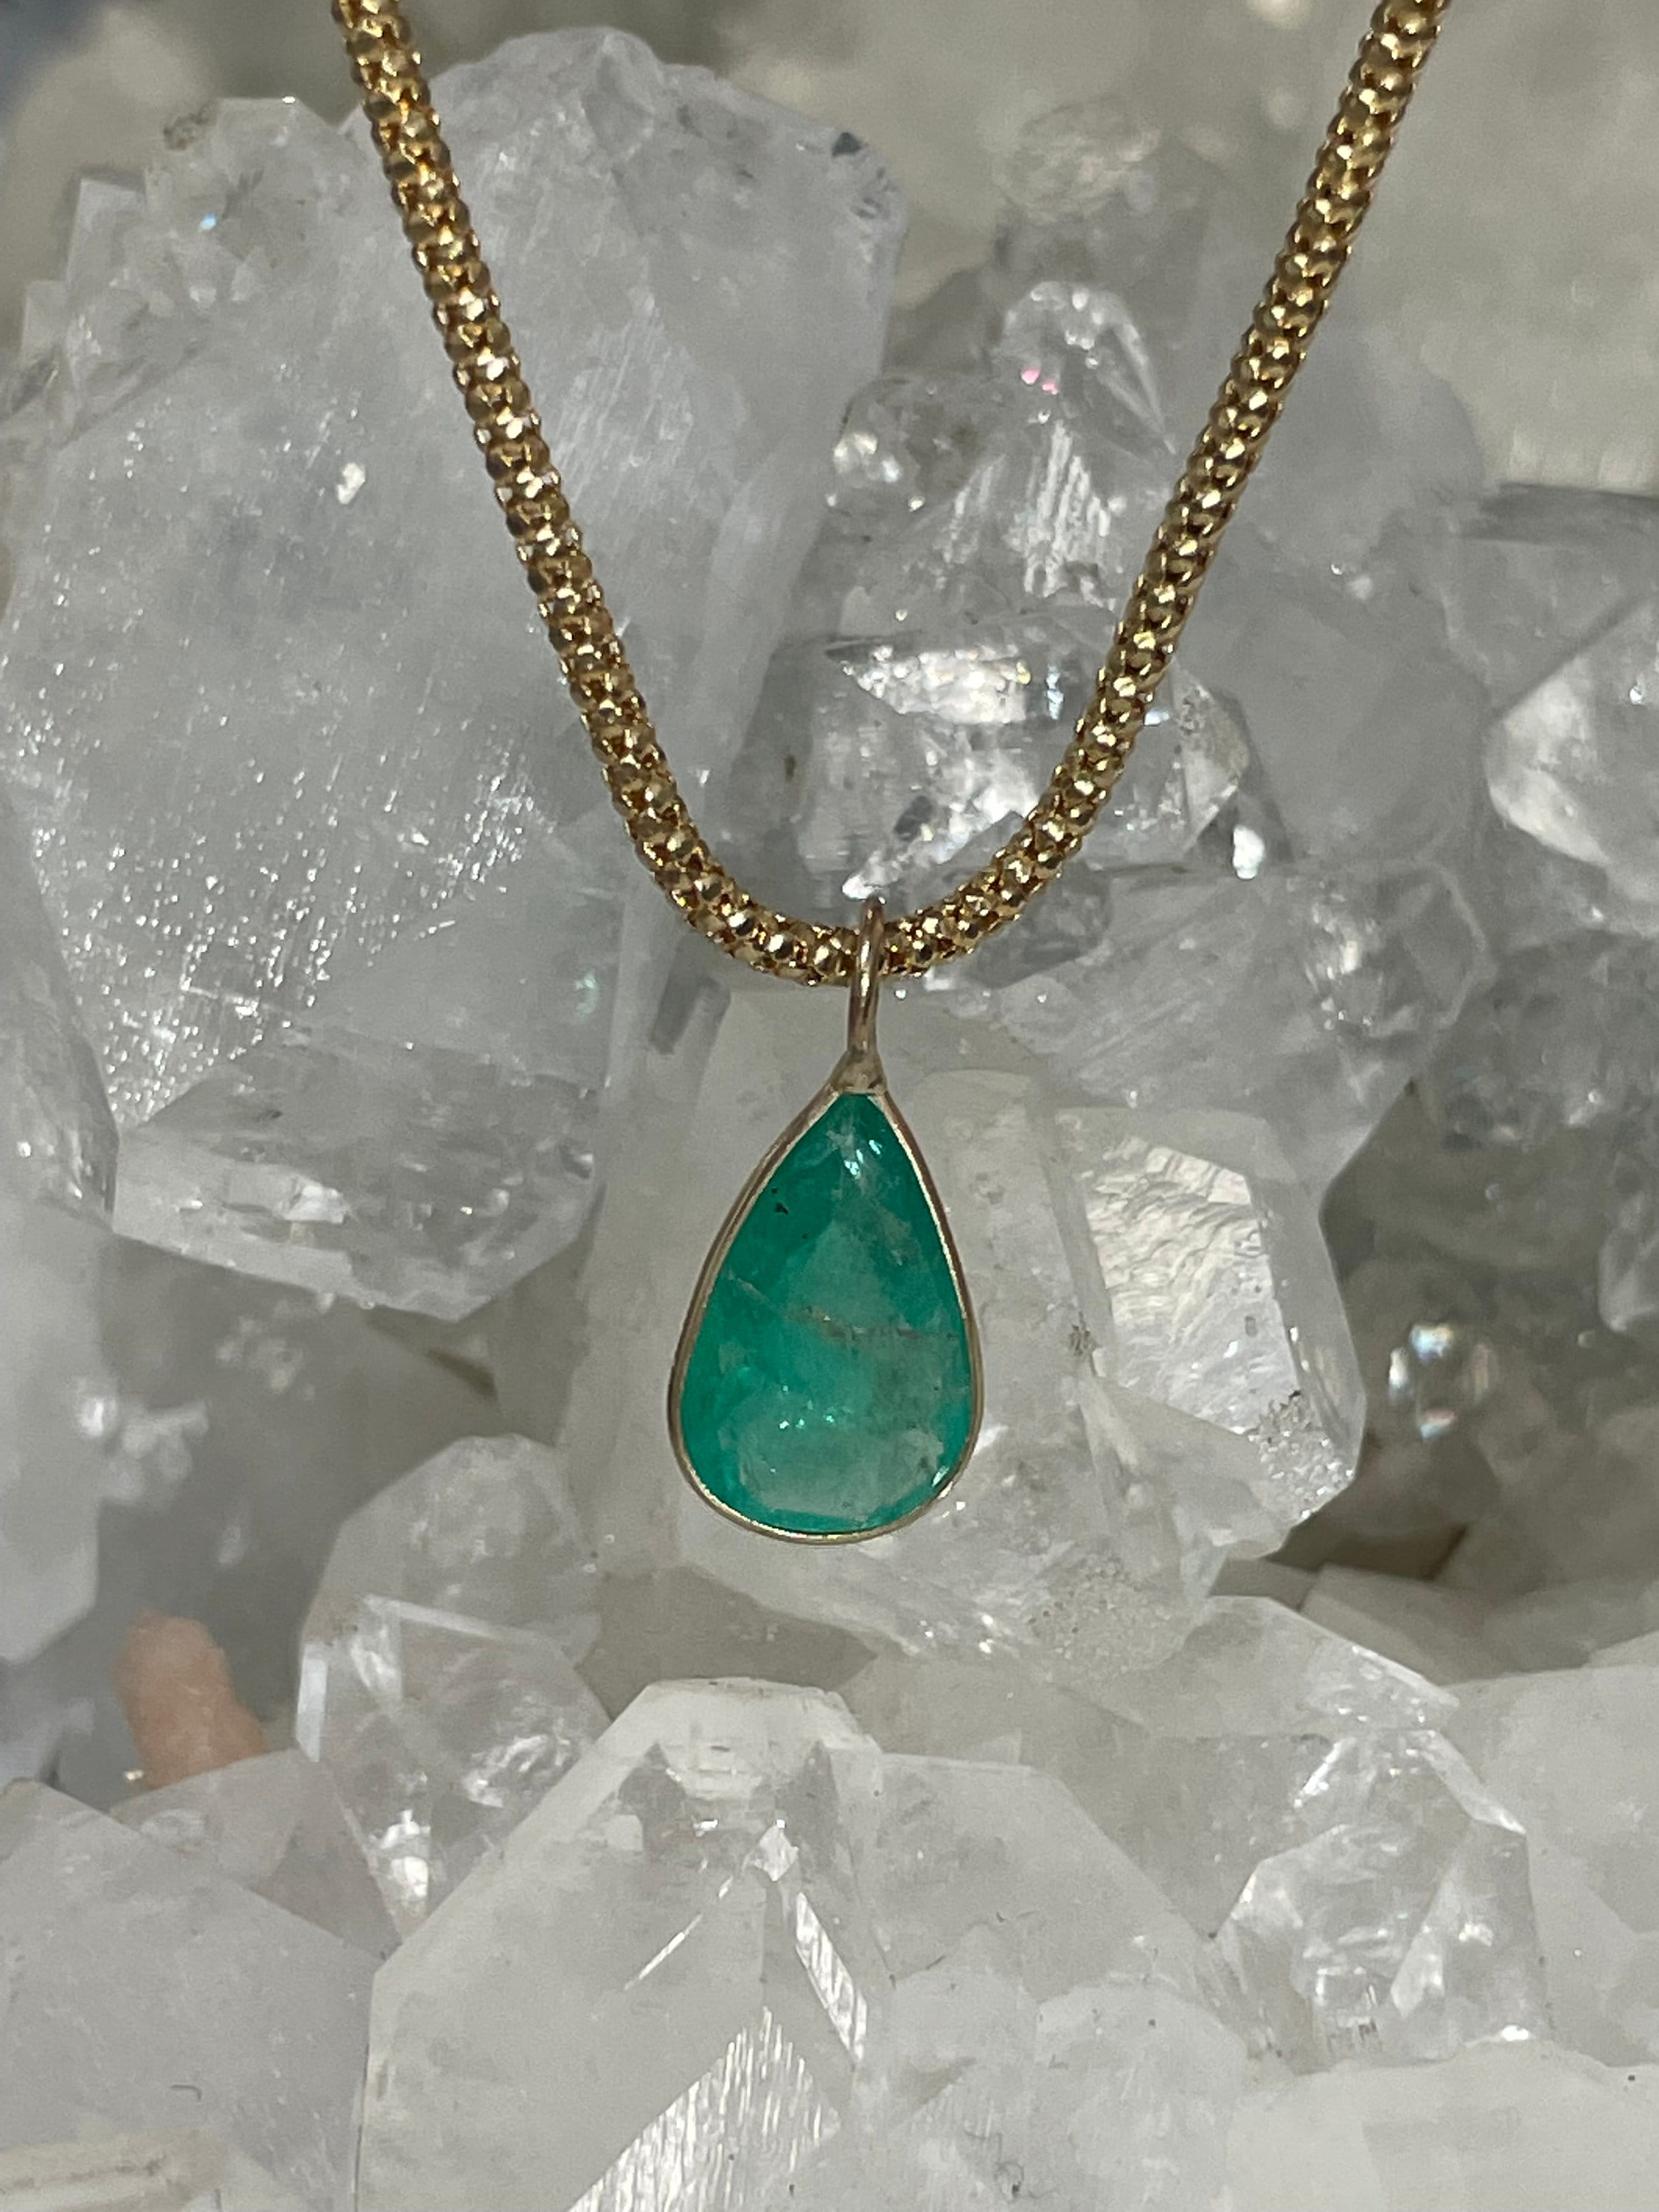 Shimmering! 2.6CT Natural Colombian Emerald 14K Yellow Gold Bezeled Charm Pendant OOAK 17x8mm